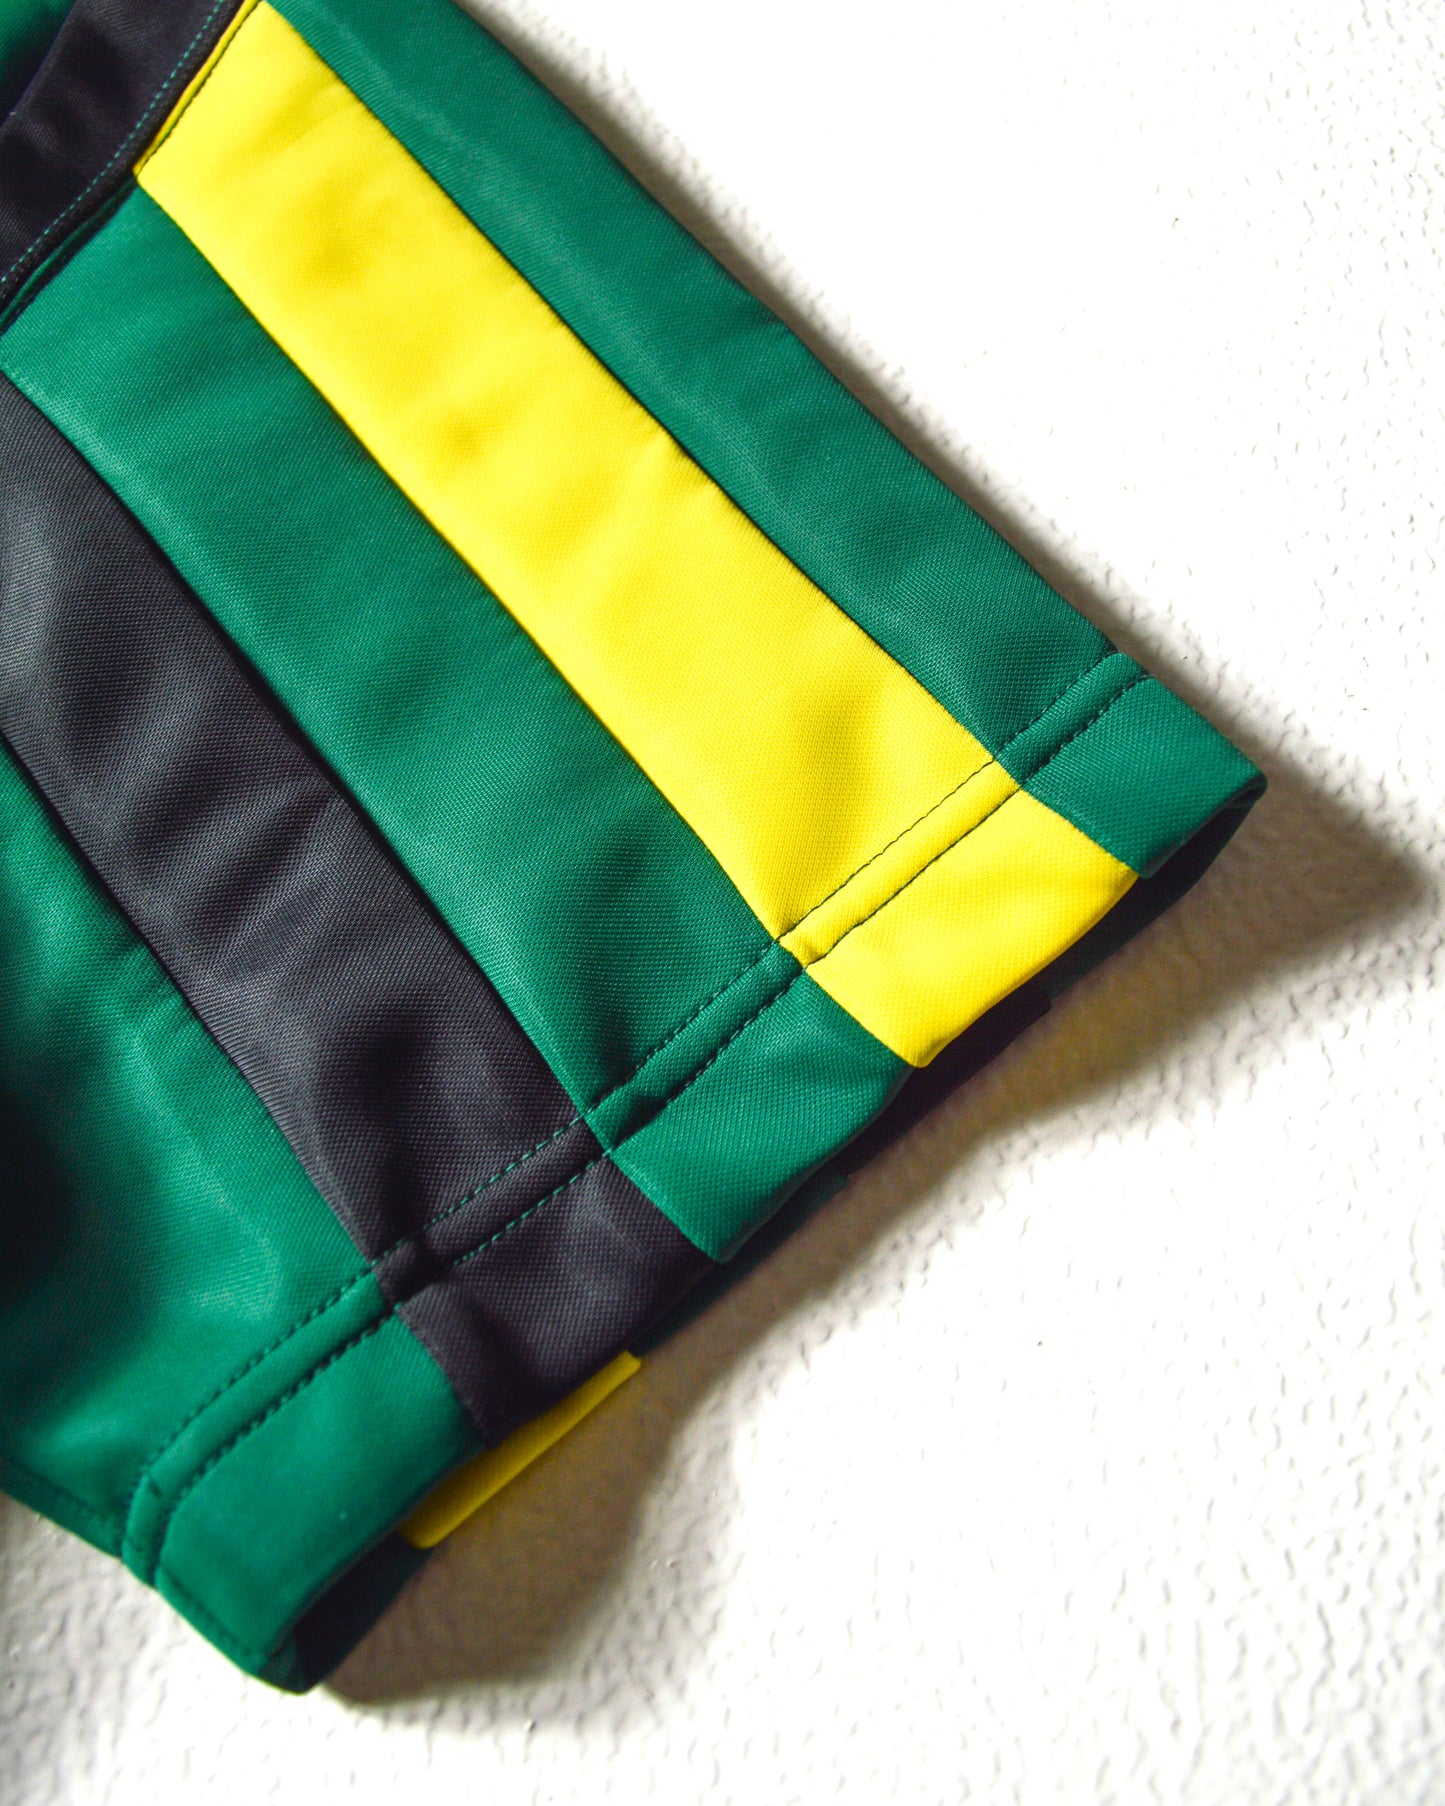 2000 Panelled Green Yellow Black Jersey (~S~)